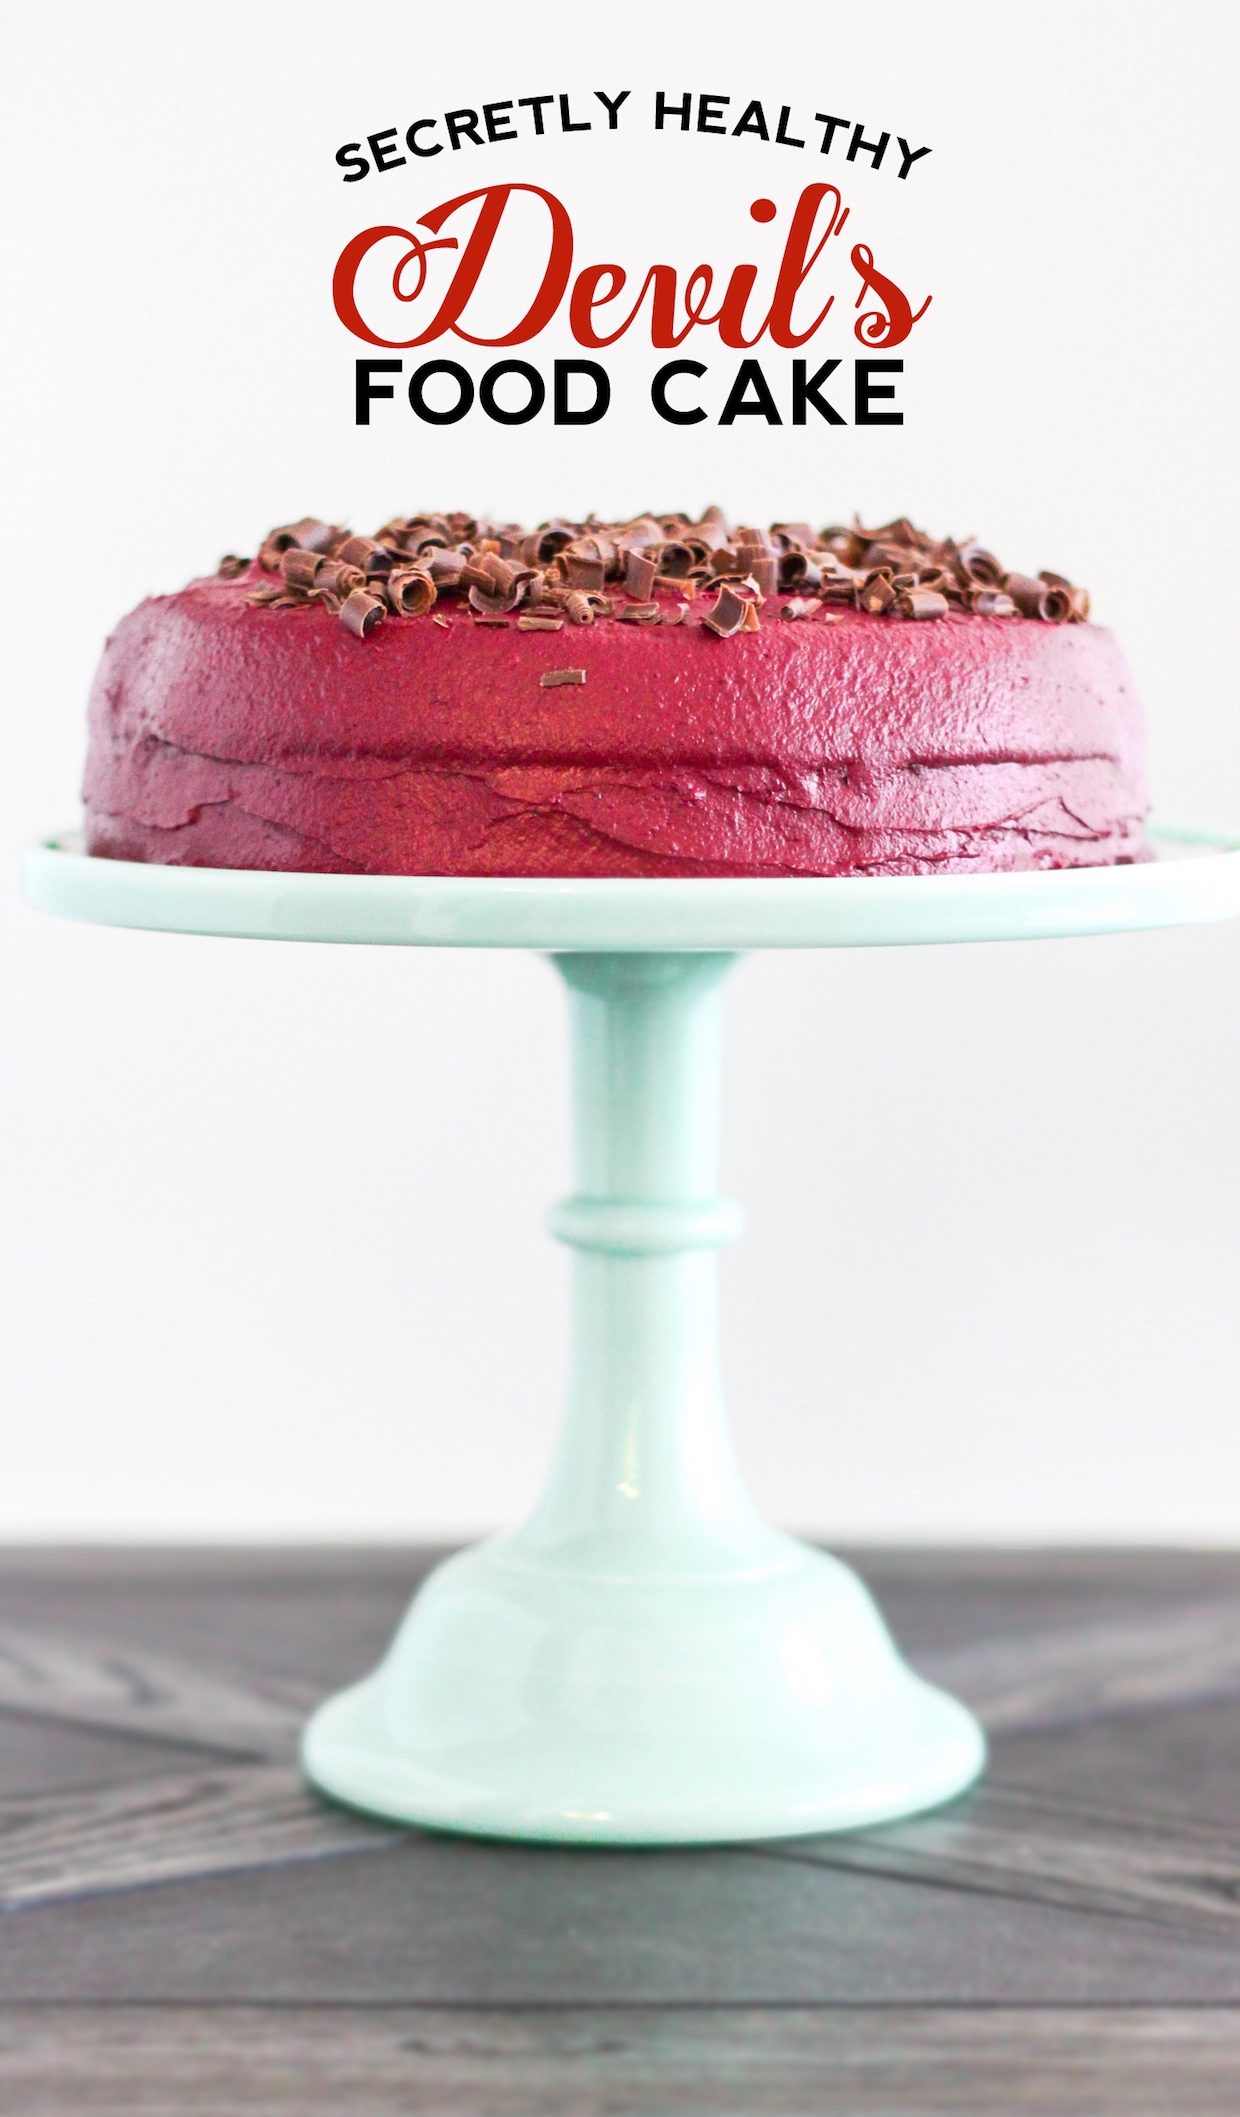 Healthy Devil’s Food Cake with Red Velvet Frosting (refined sugar free, low carb, high protein, high fiber, gluten free, dairy free, paleo) - Healthy Dessert Recipes at Desserts with Benefits